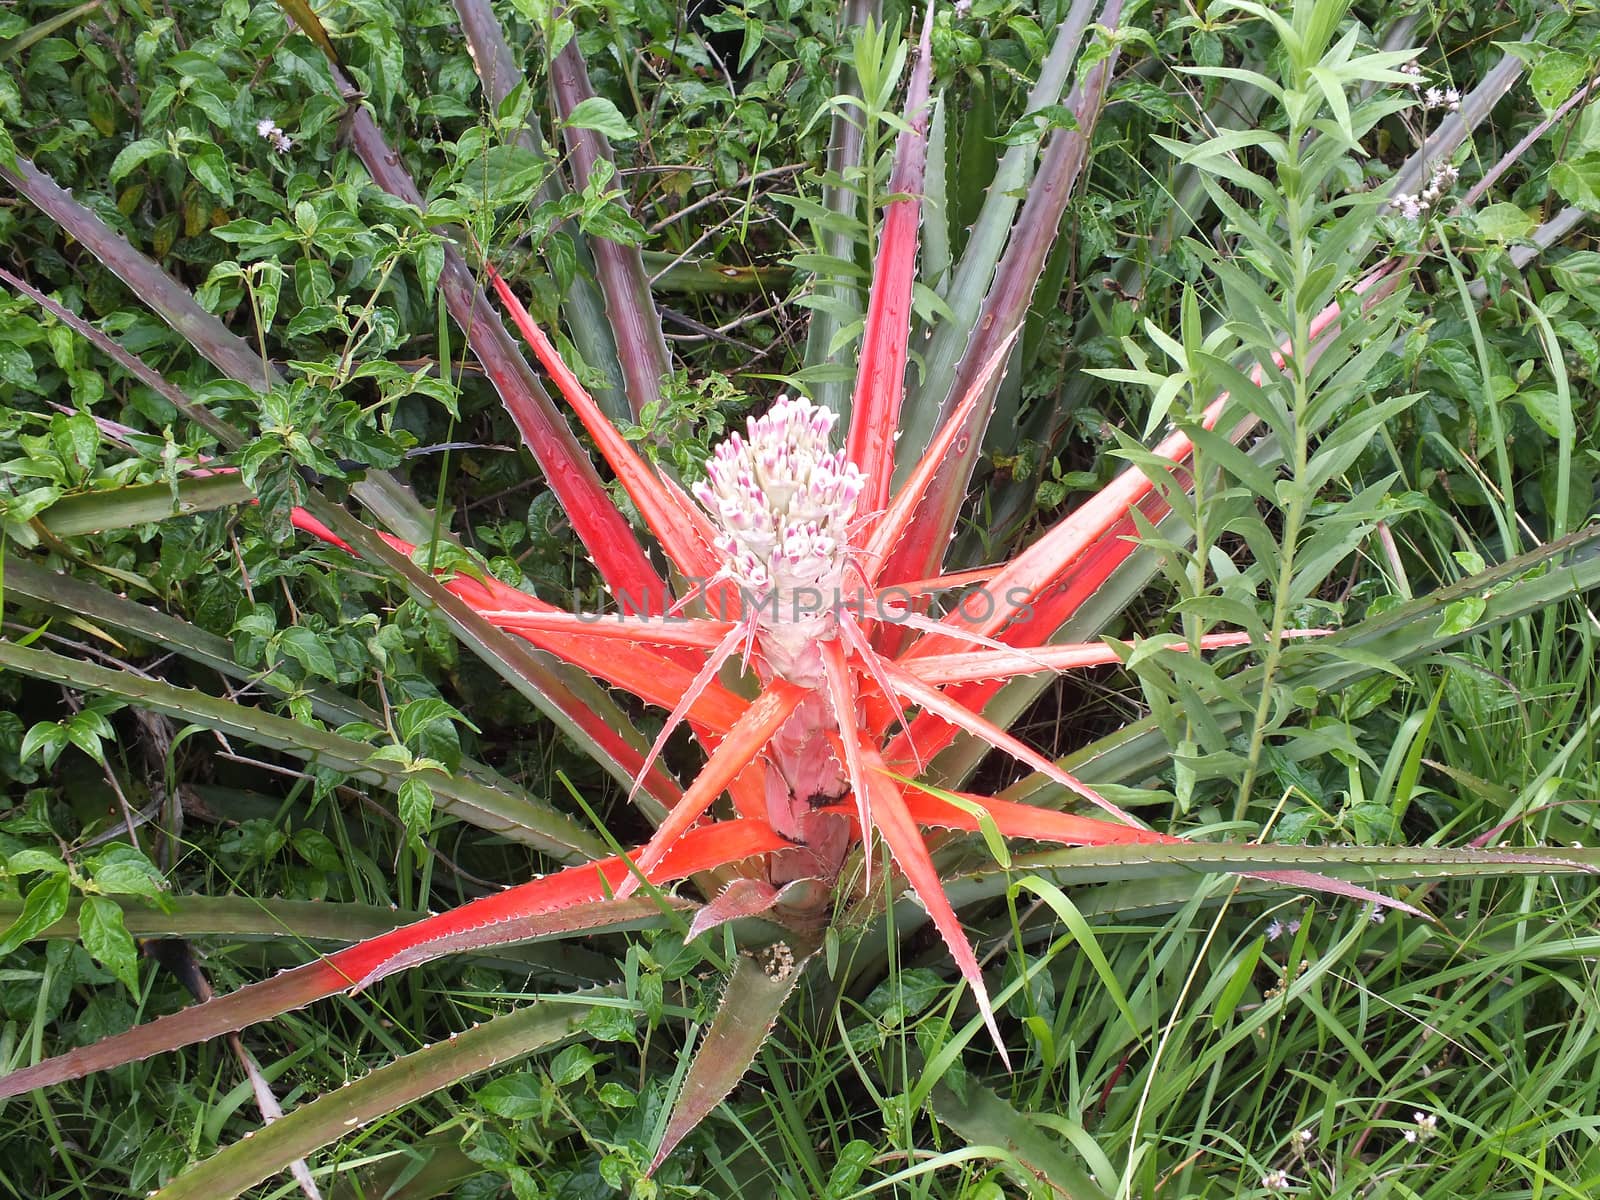 The Heart of Flame (Bromelia balansae) is a large terrestrial bromeliad native to Argentina, Brazil, and Paraguay. It has green leaves that grow 2 - 4 feet long with very sharp spines. When prepared to bloom, the centre of the plant becomes bright red and then white before releasing its fruit.